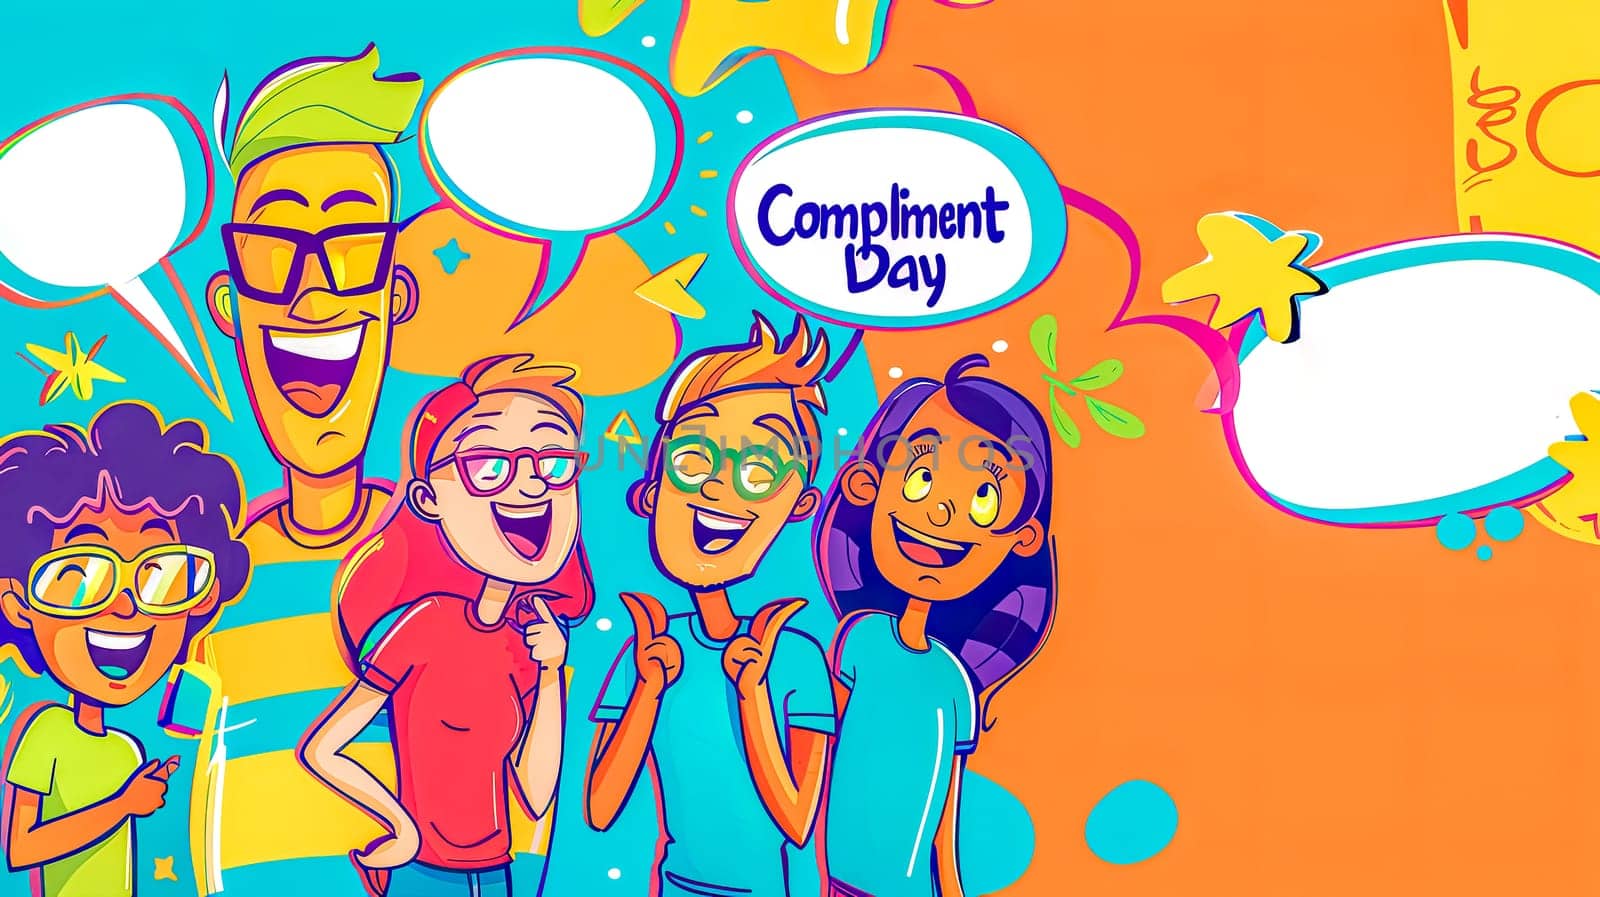 Colorful compliment day illustration with happy characters, copy space by Edophoto